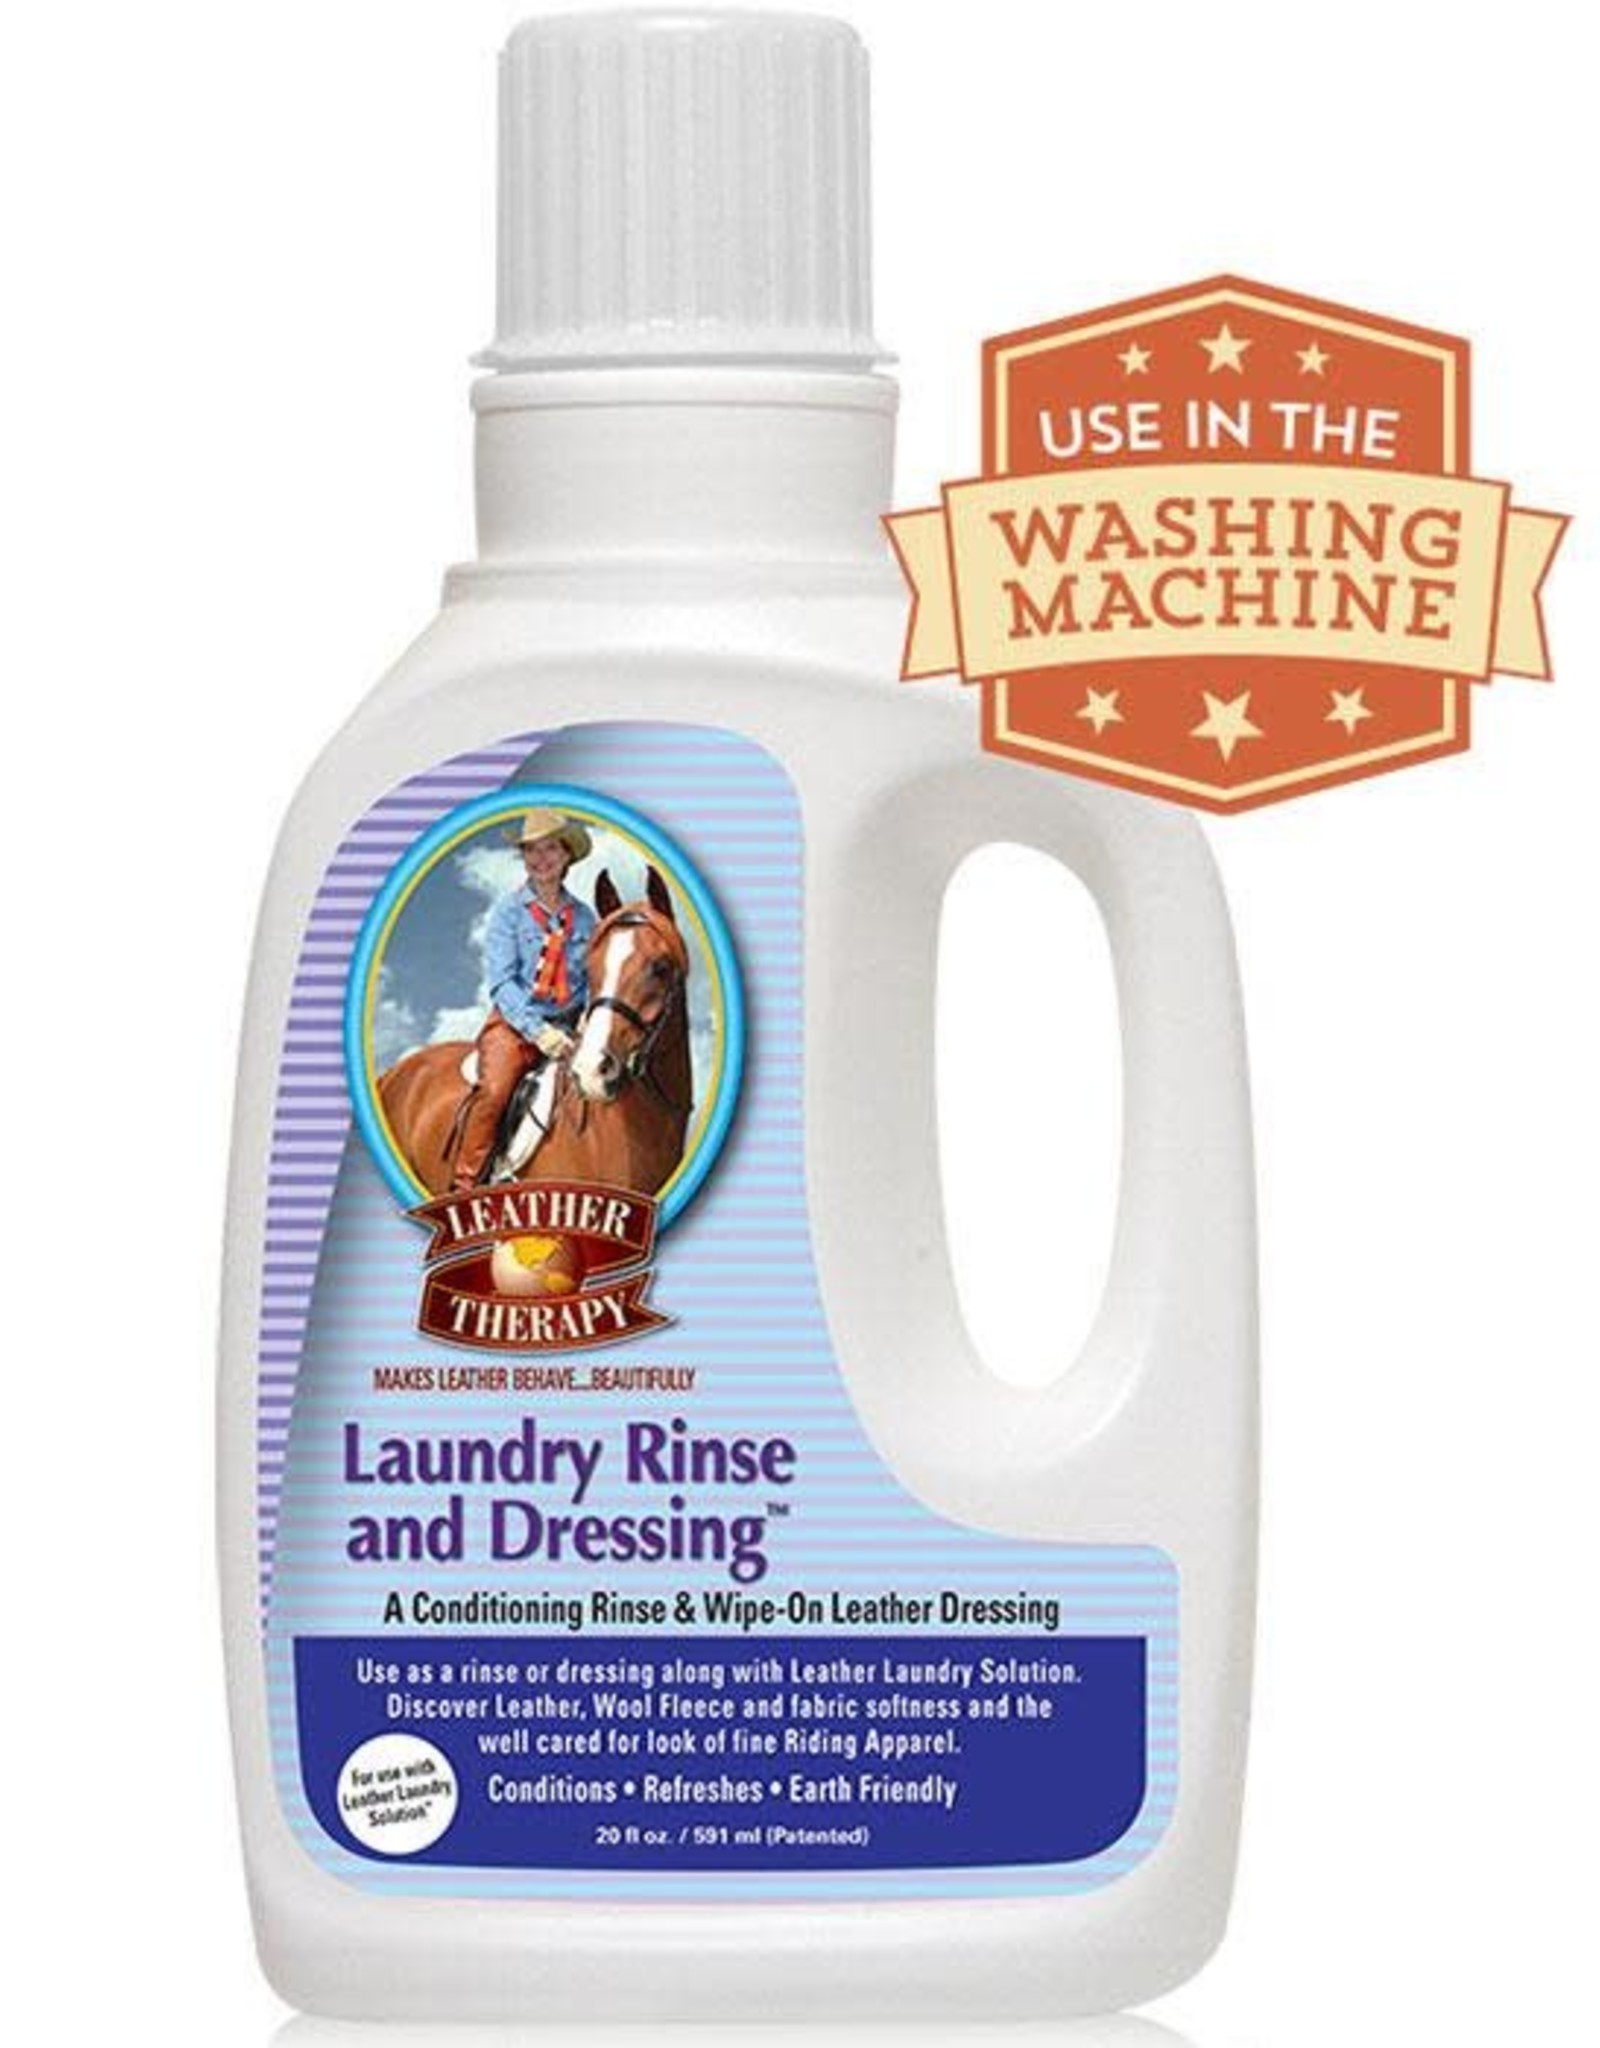 LEATHER THERAPY LAUNDRY RINSE